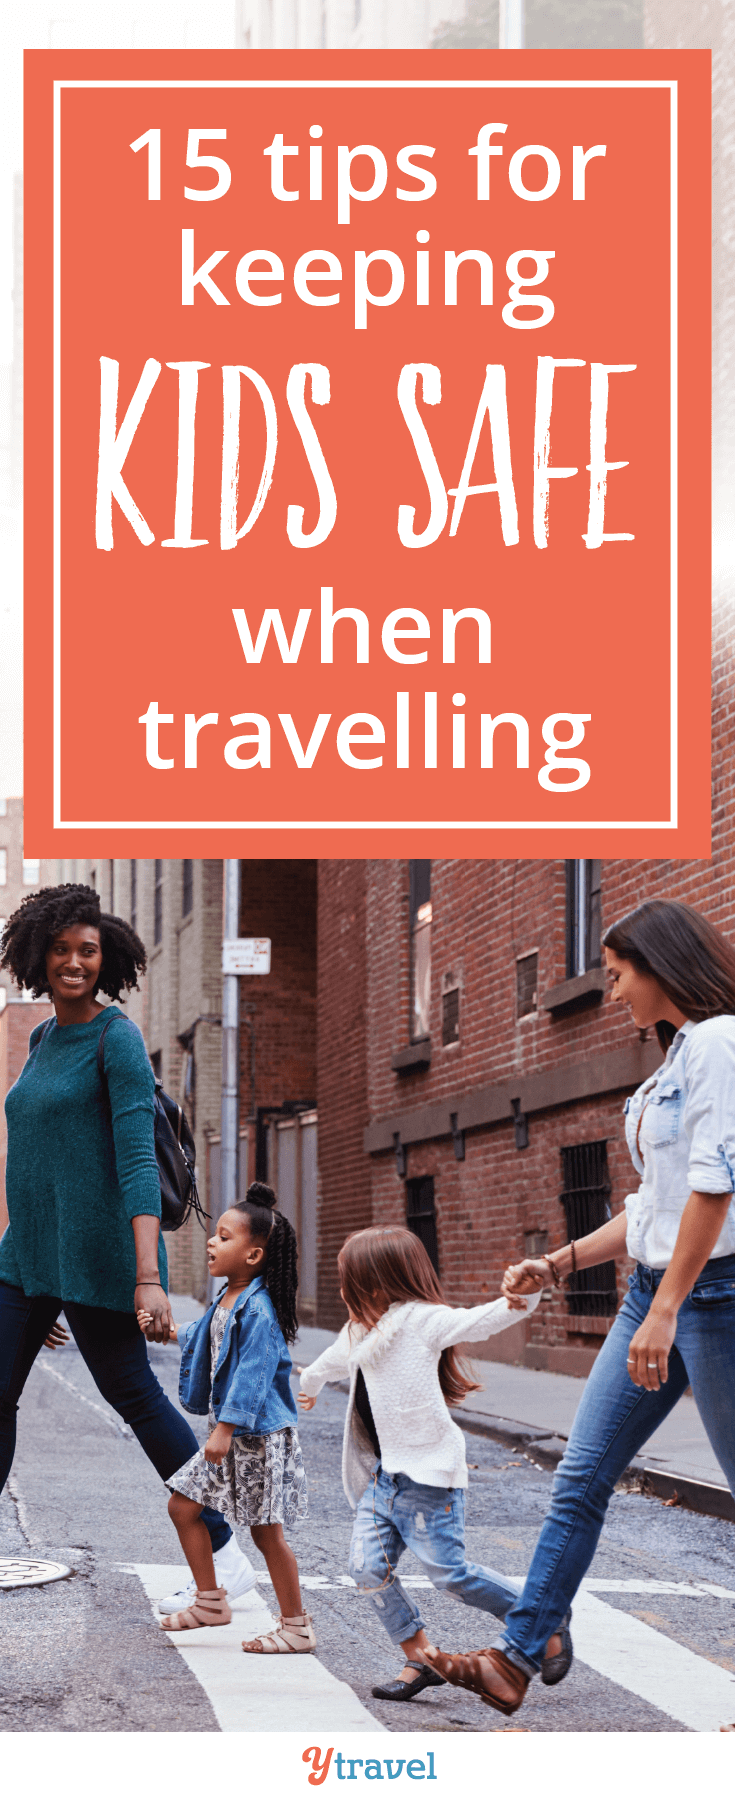 Planning a family holiday? Worried about child safety? Make sure you travel safely by following these travel safety tips with kids.